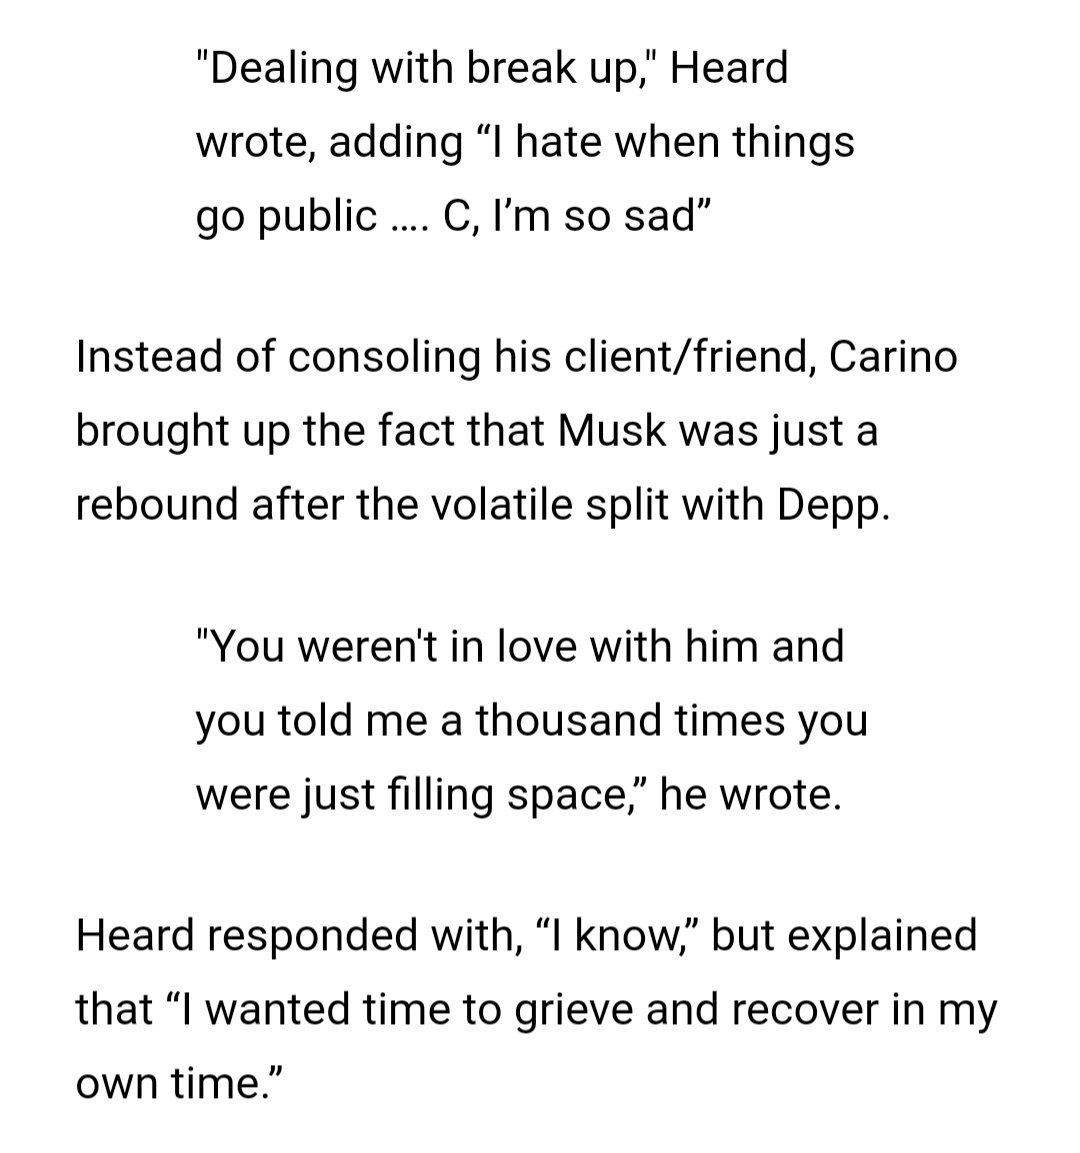 Next exchange after her breakup with Elon Musk. She says she "hates when things go public"... Carino says that she told him Musk was just a rebound. Amber answers, "I know."